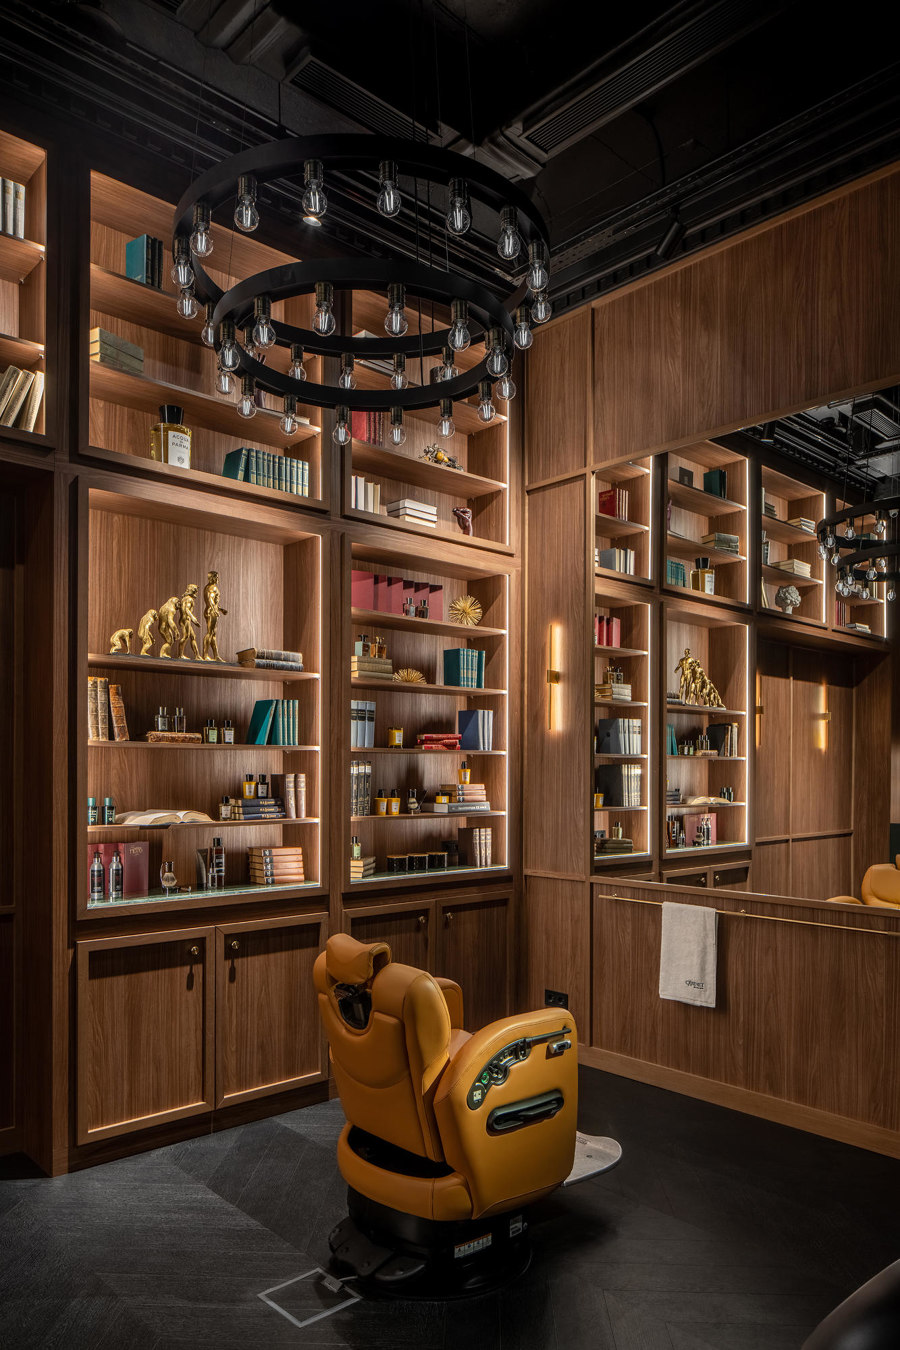 Architonic's most-viewed projects of 2021: Retail interiors | Novedades